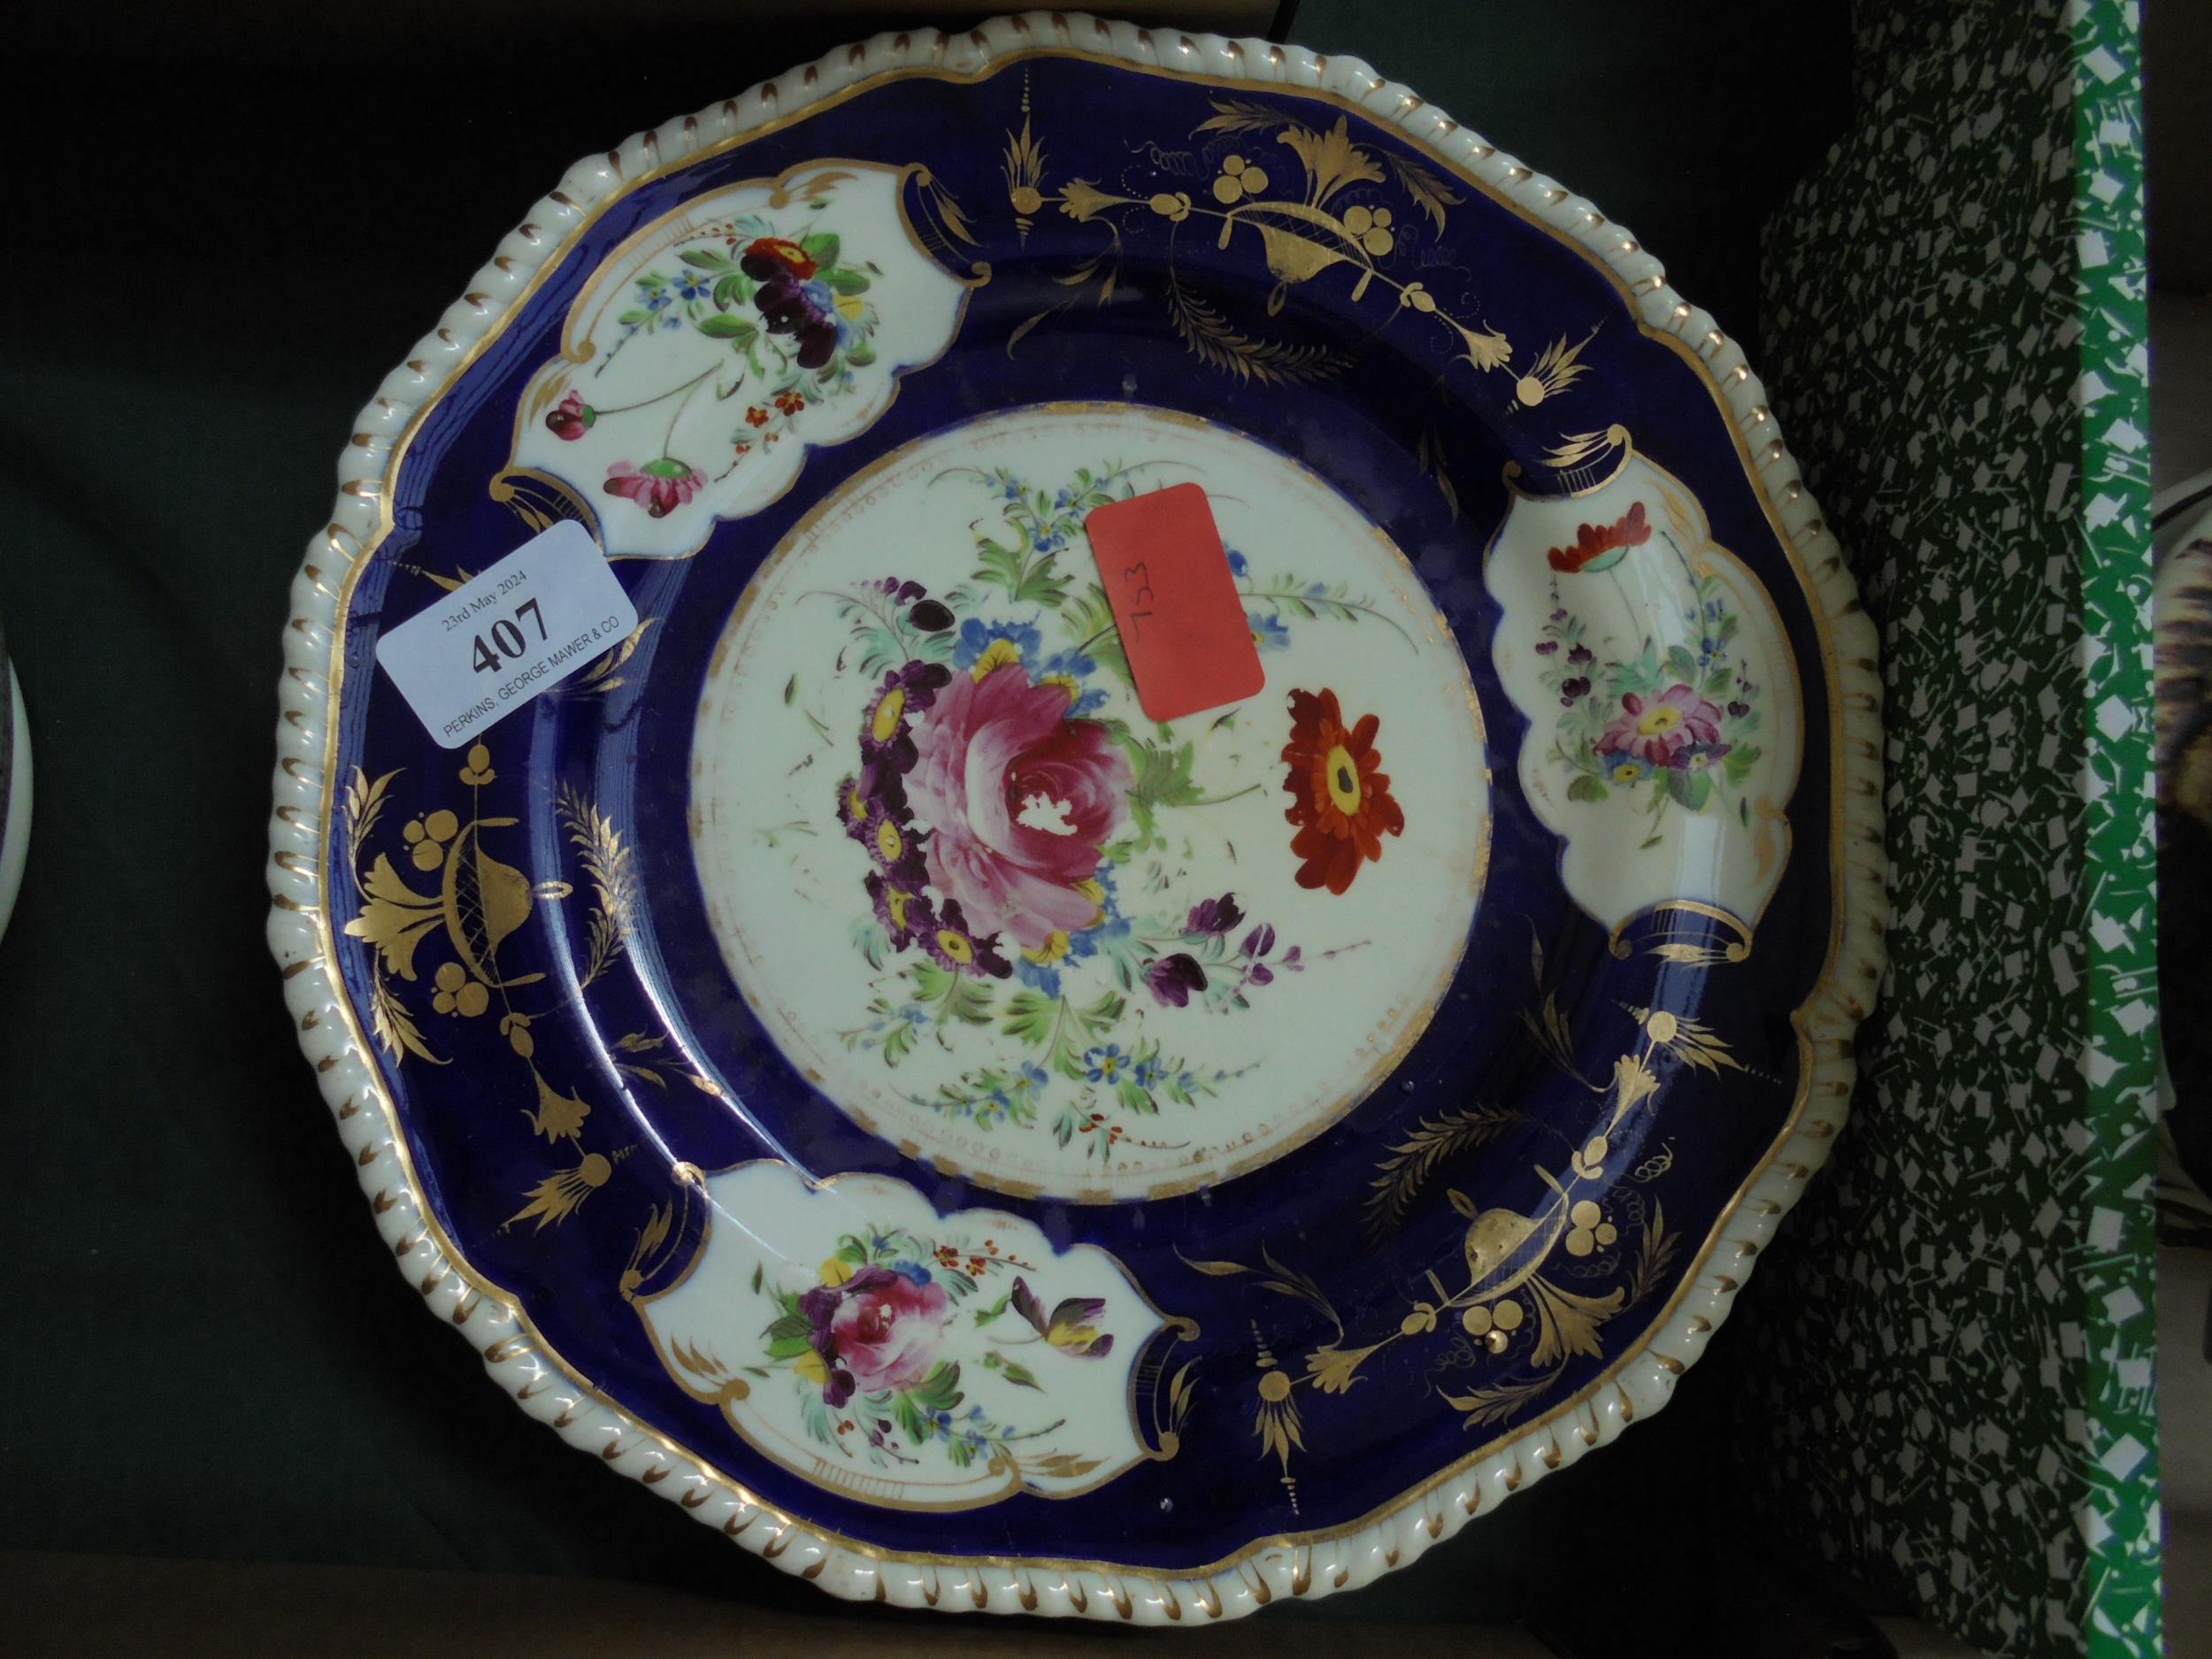 3 early Bloor Derby plates with flower pattern